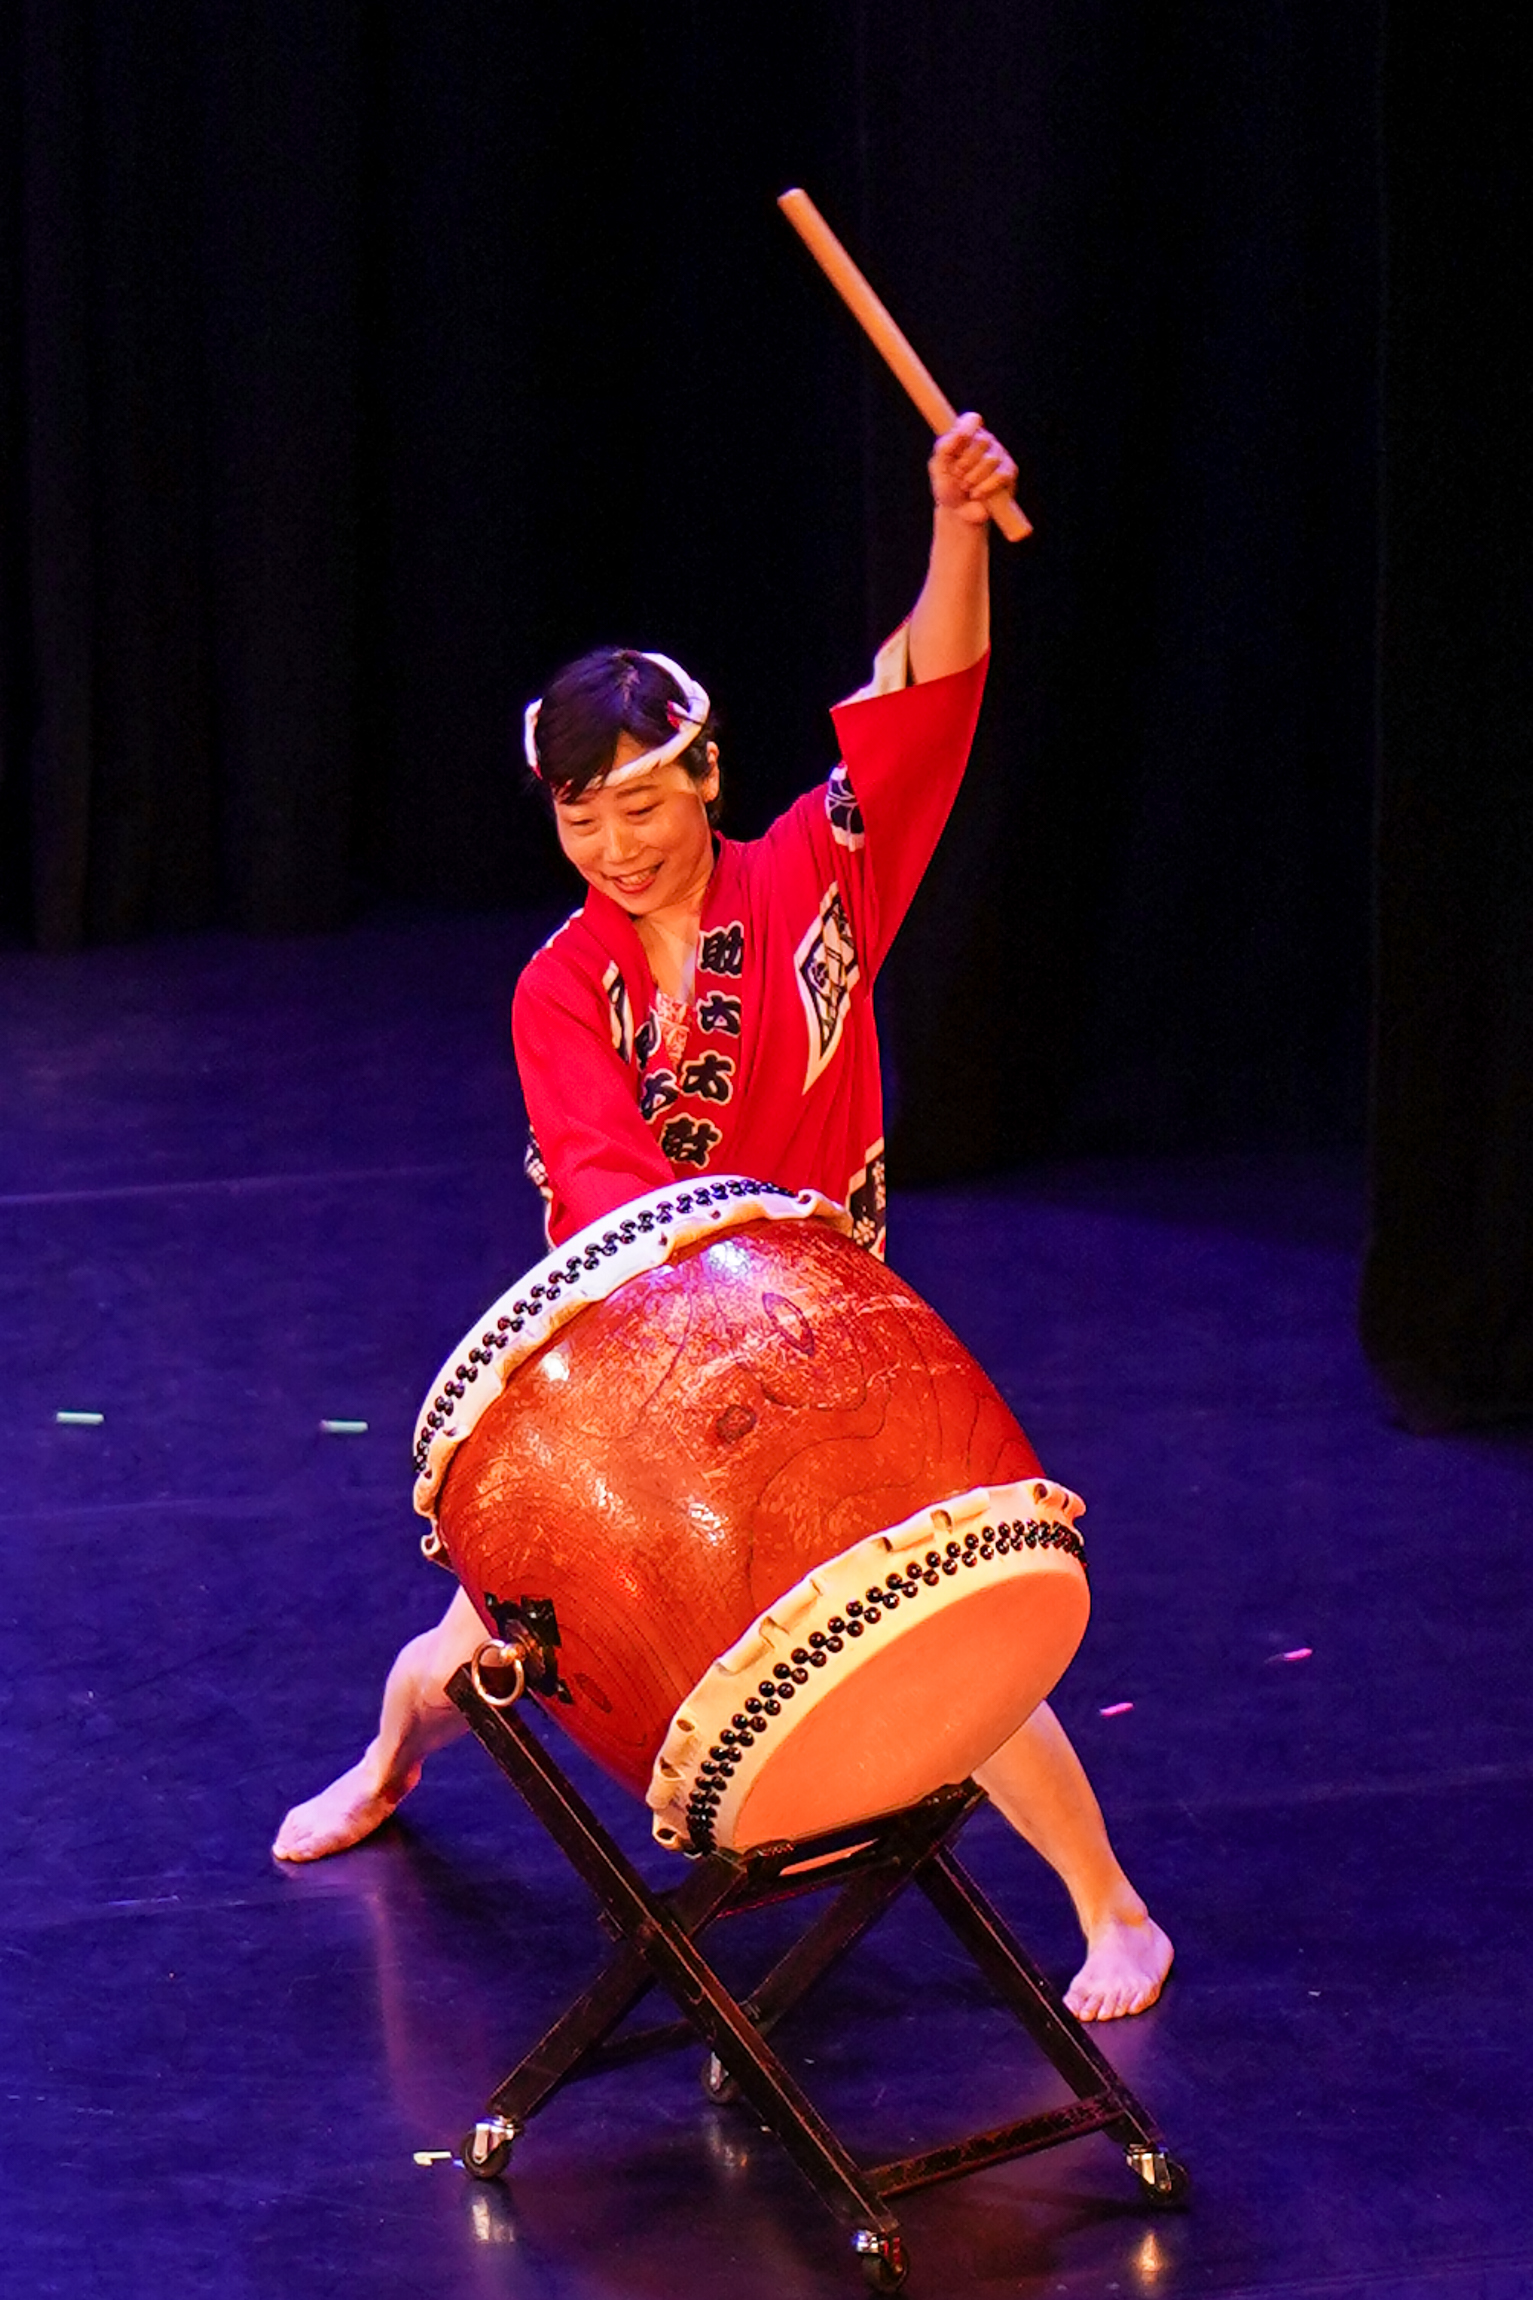 A drummer dressed in traditional Japanese costume, plays a taiko drum.